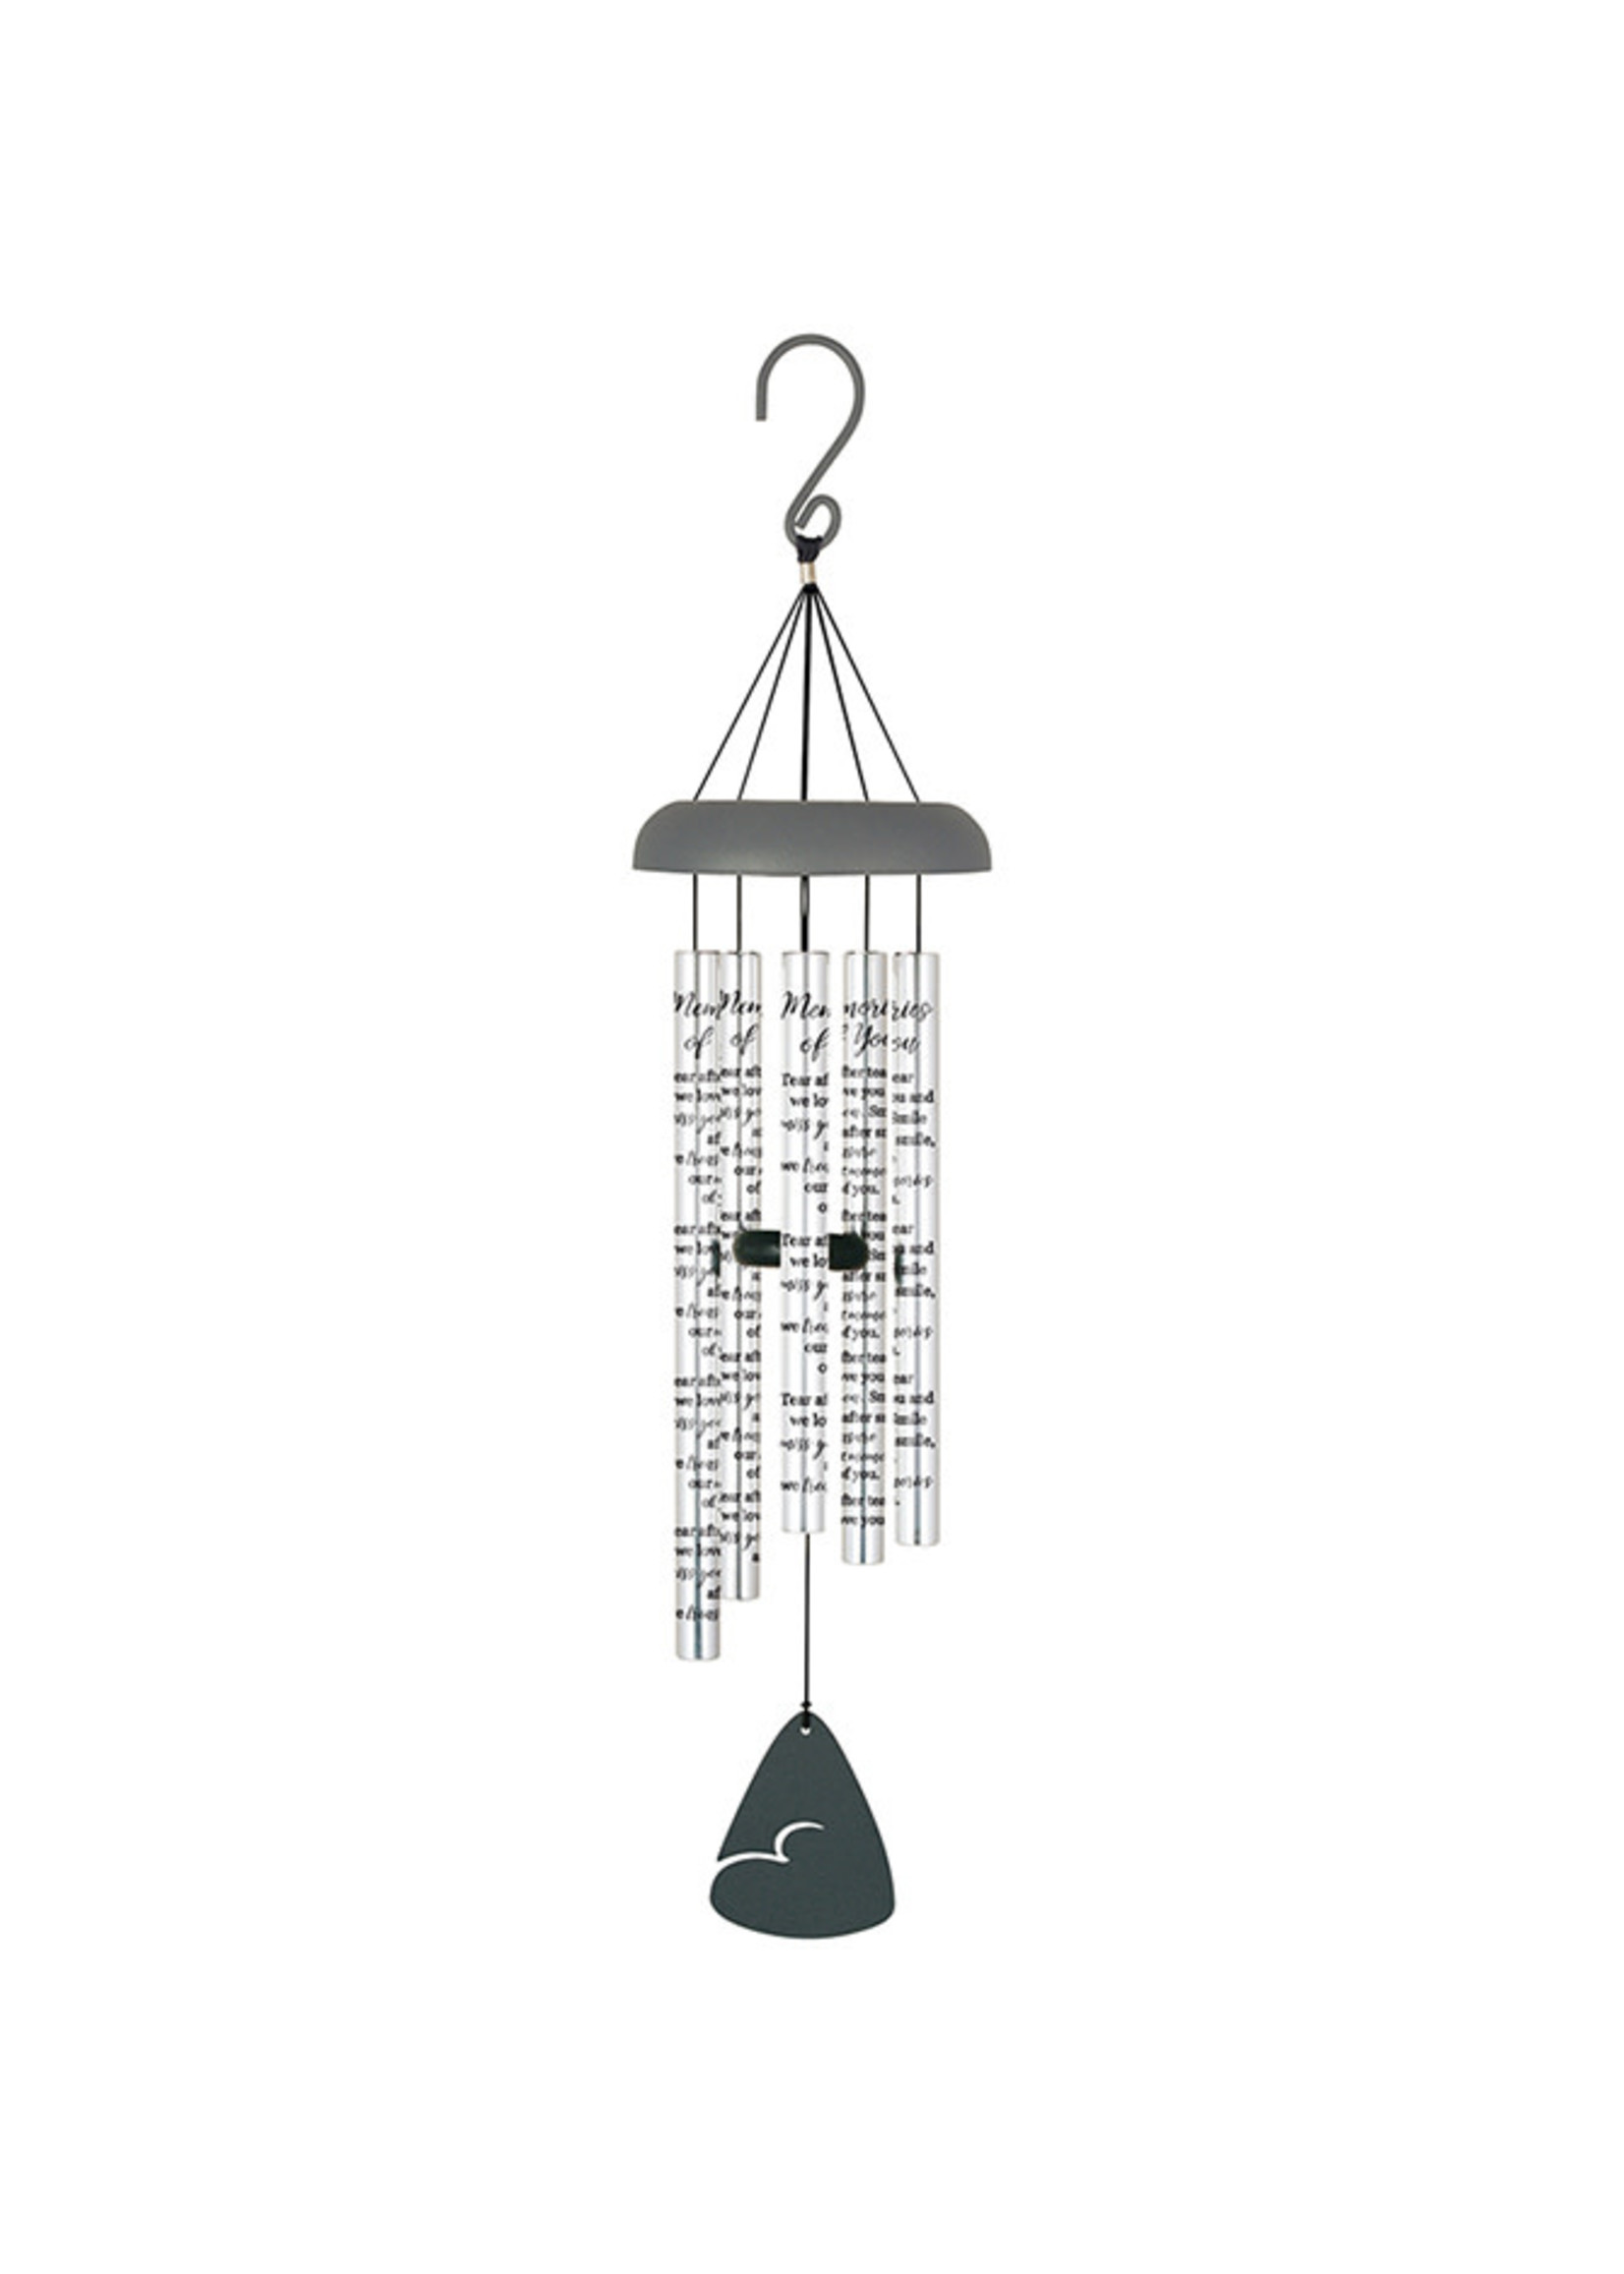 Carson Home Accents Sonnet Chime